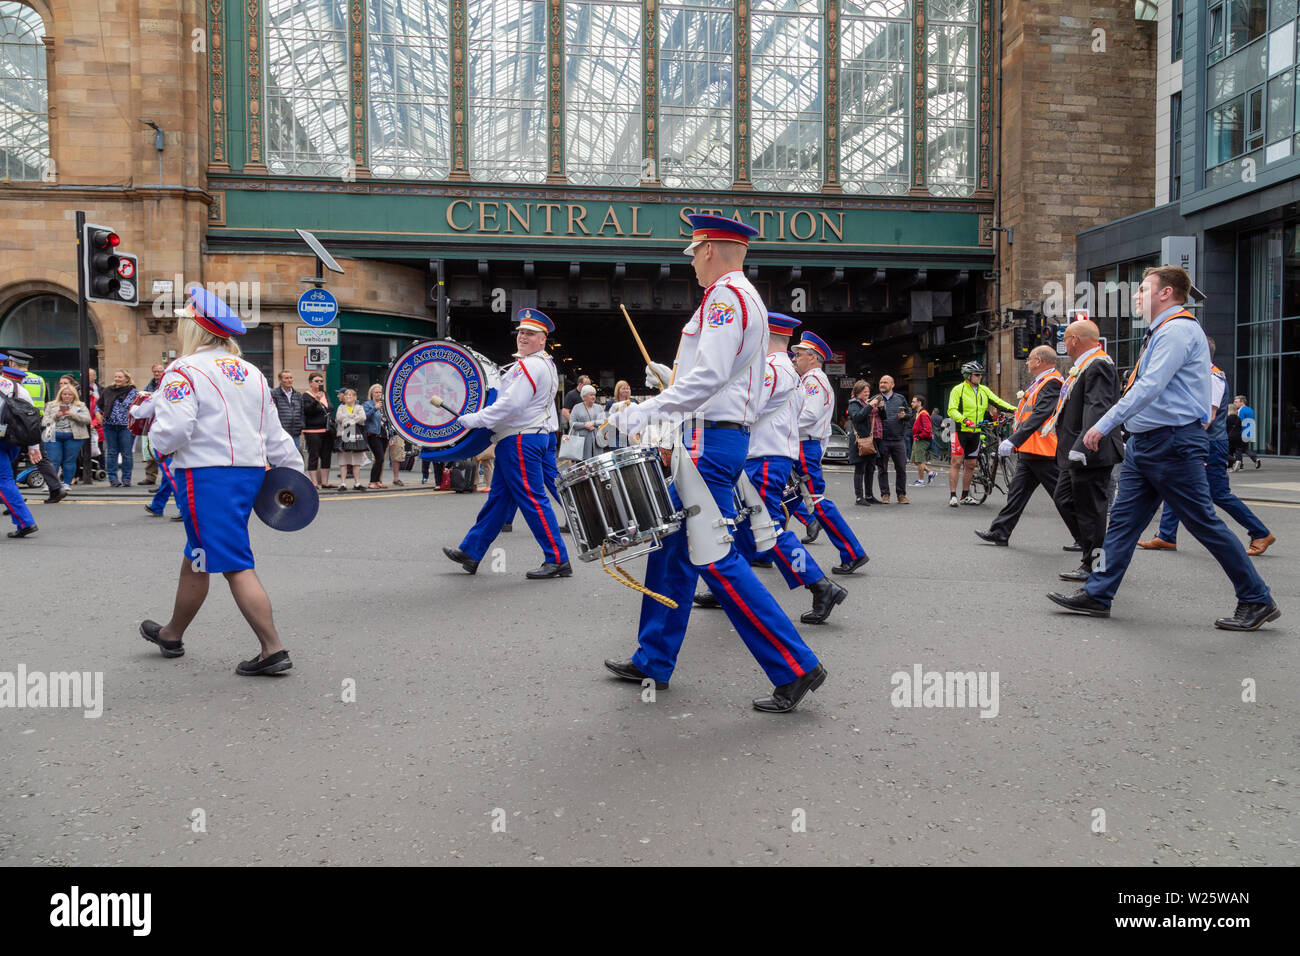 The 2019 annual Orange Walk in Glasgow attracts thousands of onlookers and participants. The parade this year is taking a modified route after an incident in 2018 in which a catholic priest was spat on. Stock Photo